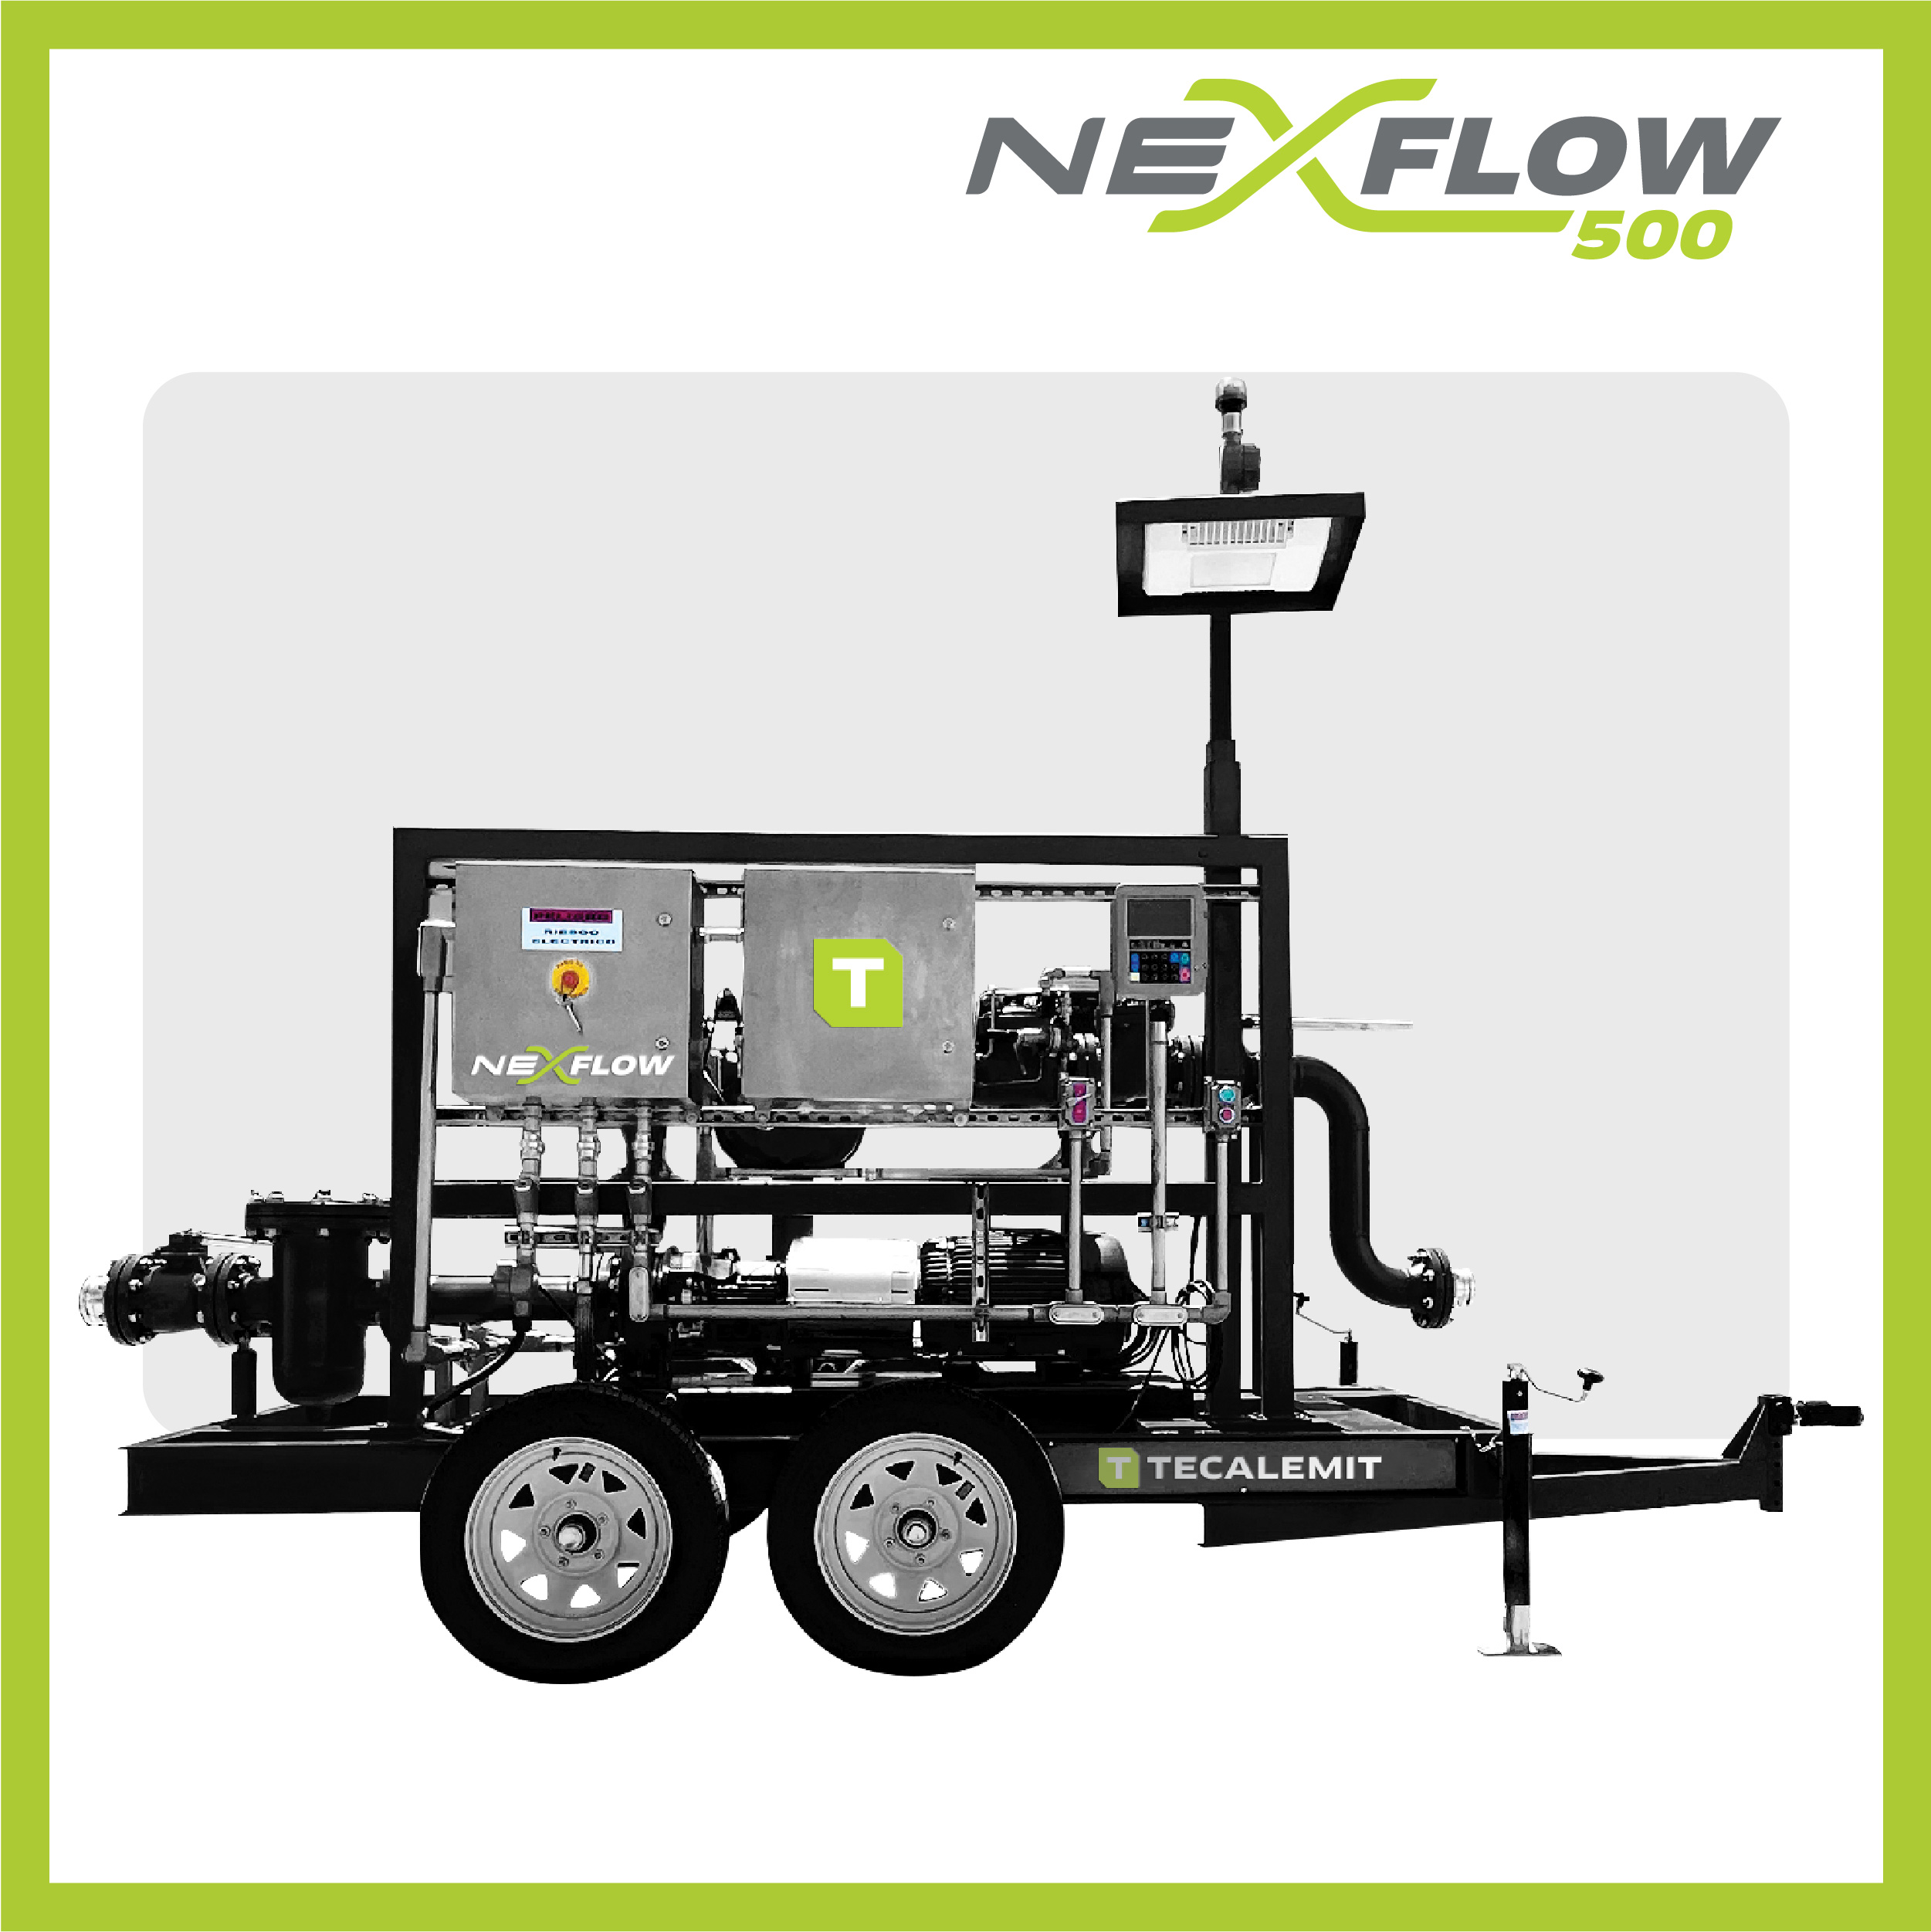 Image of Tecalemit's NexFlow Transloader 500, a robust and powerful mobile transloading unit designed for high-capacity transfer of aviation fuel, renewable diesel fuel, and other refined petroleum products. Features a 4-inch GSD cast iron pump, 20 HP motor, and operates at 500 gallons per minute. The unit is Class 1/Div 2 certified and measures 16 feet in length. Ideal for applications in aviation, barge terminals, and truck-to-truck transfers.